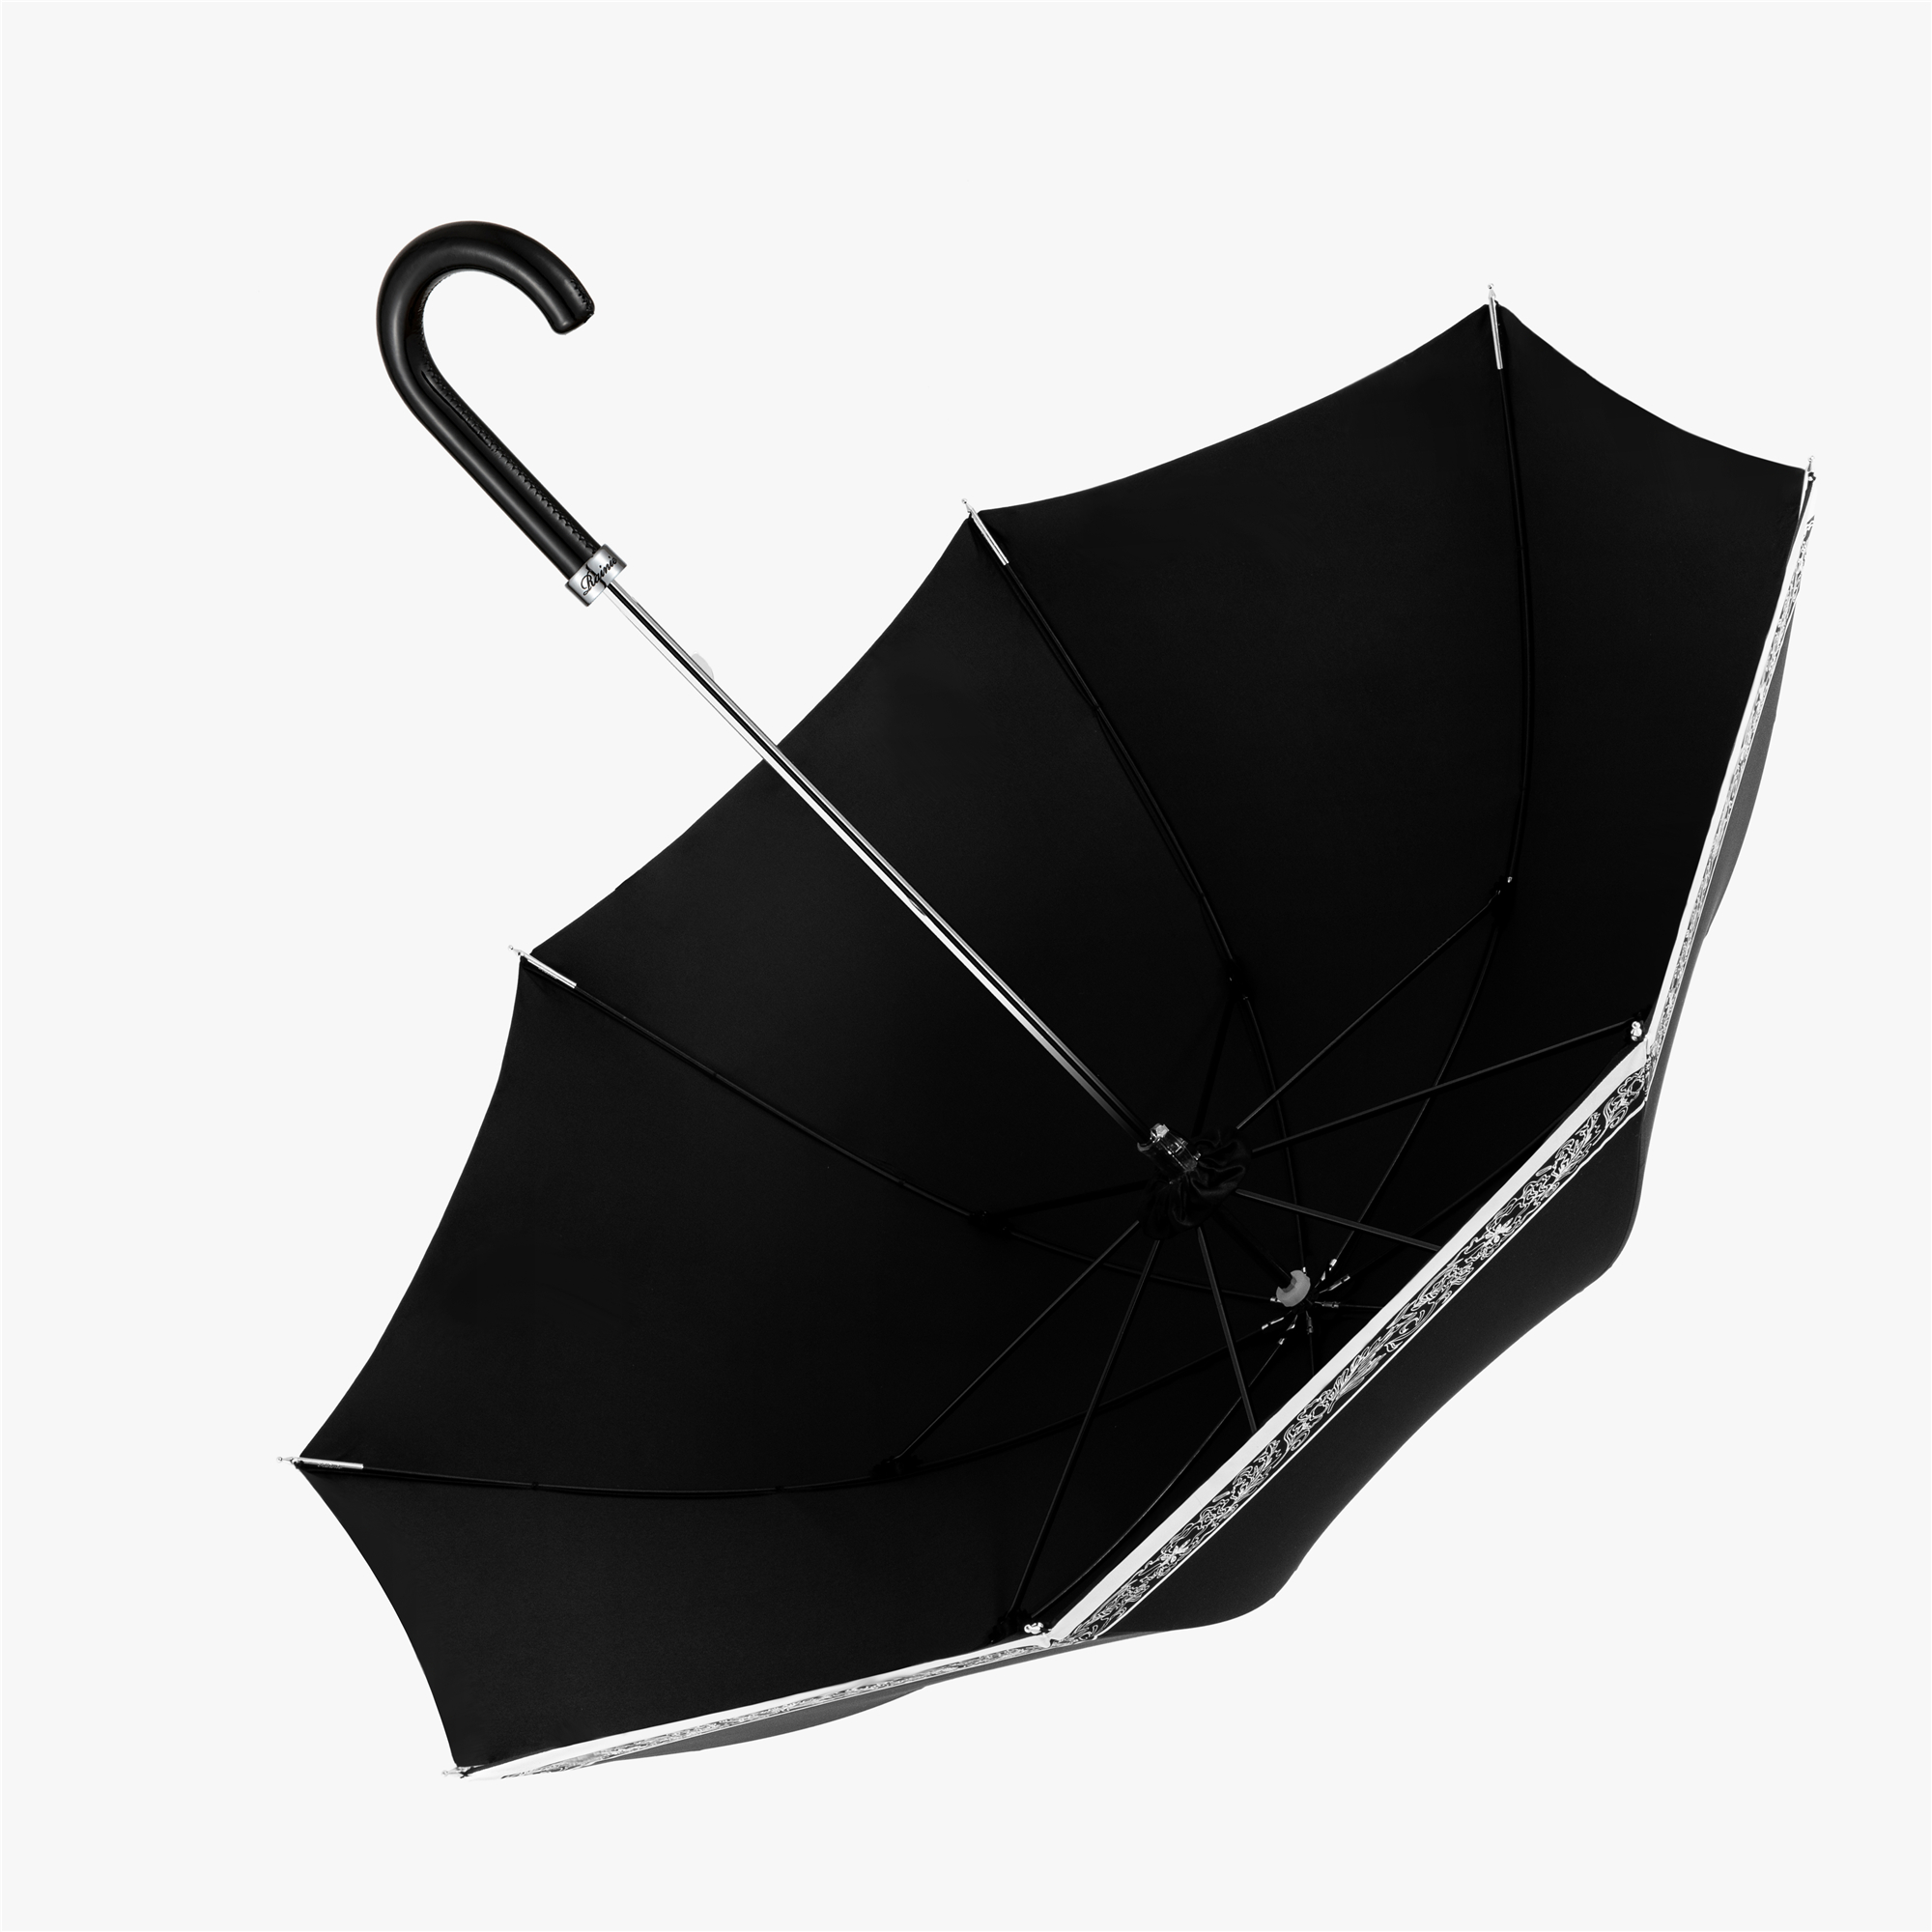 Lambskin umbrella with curved handle